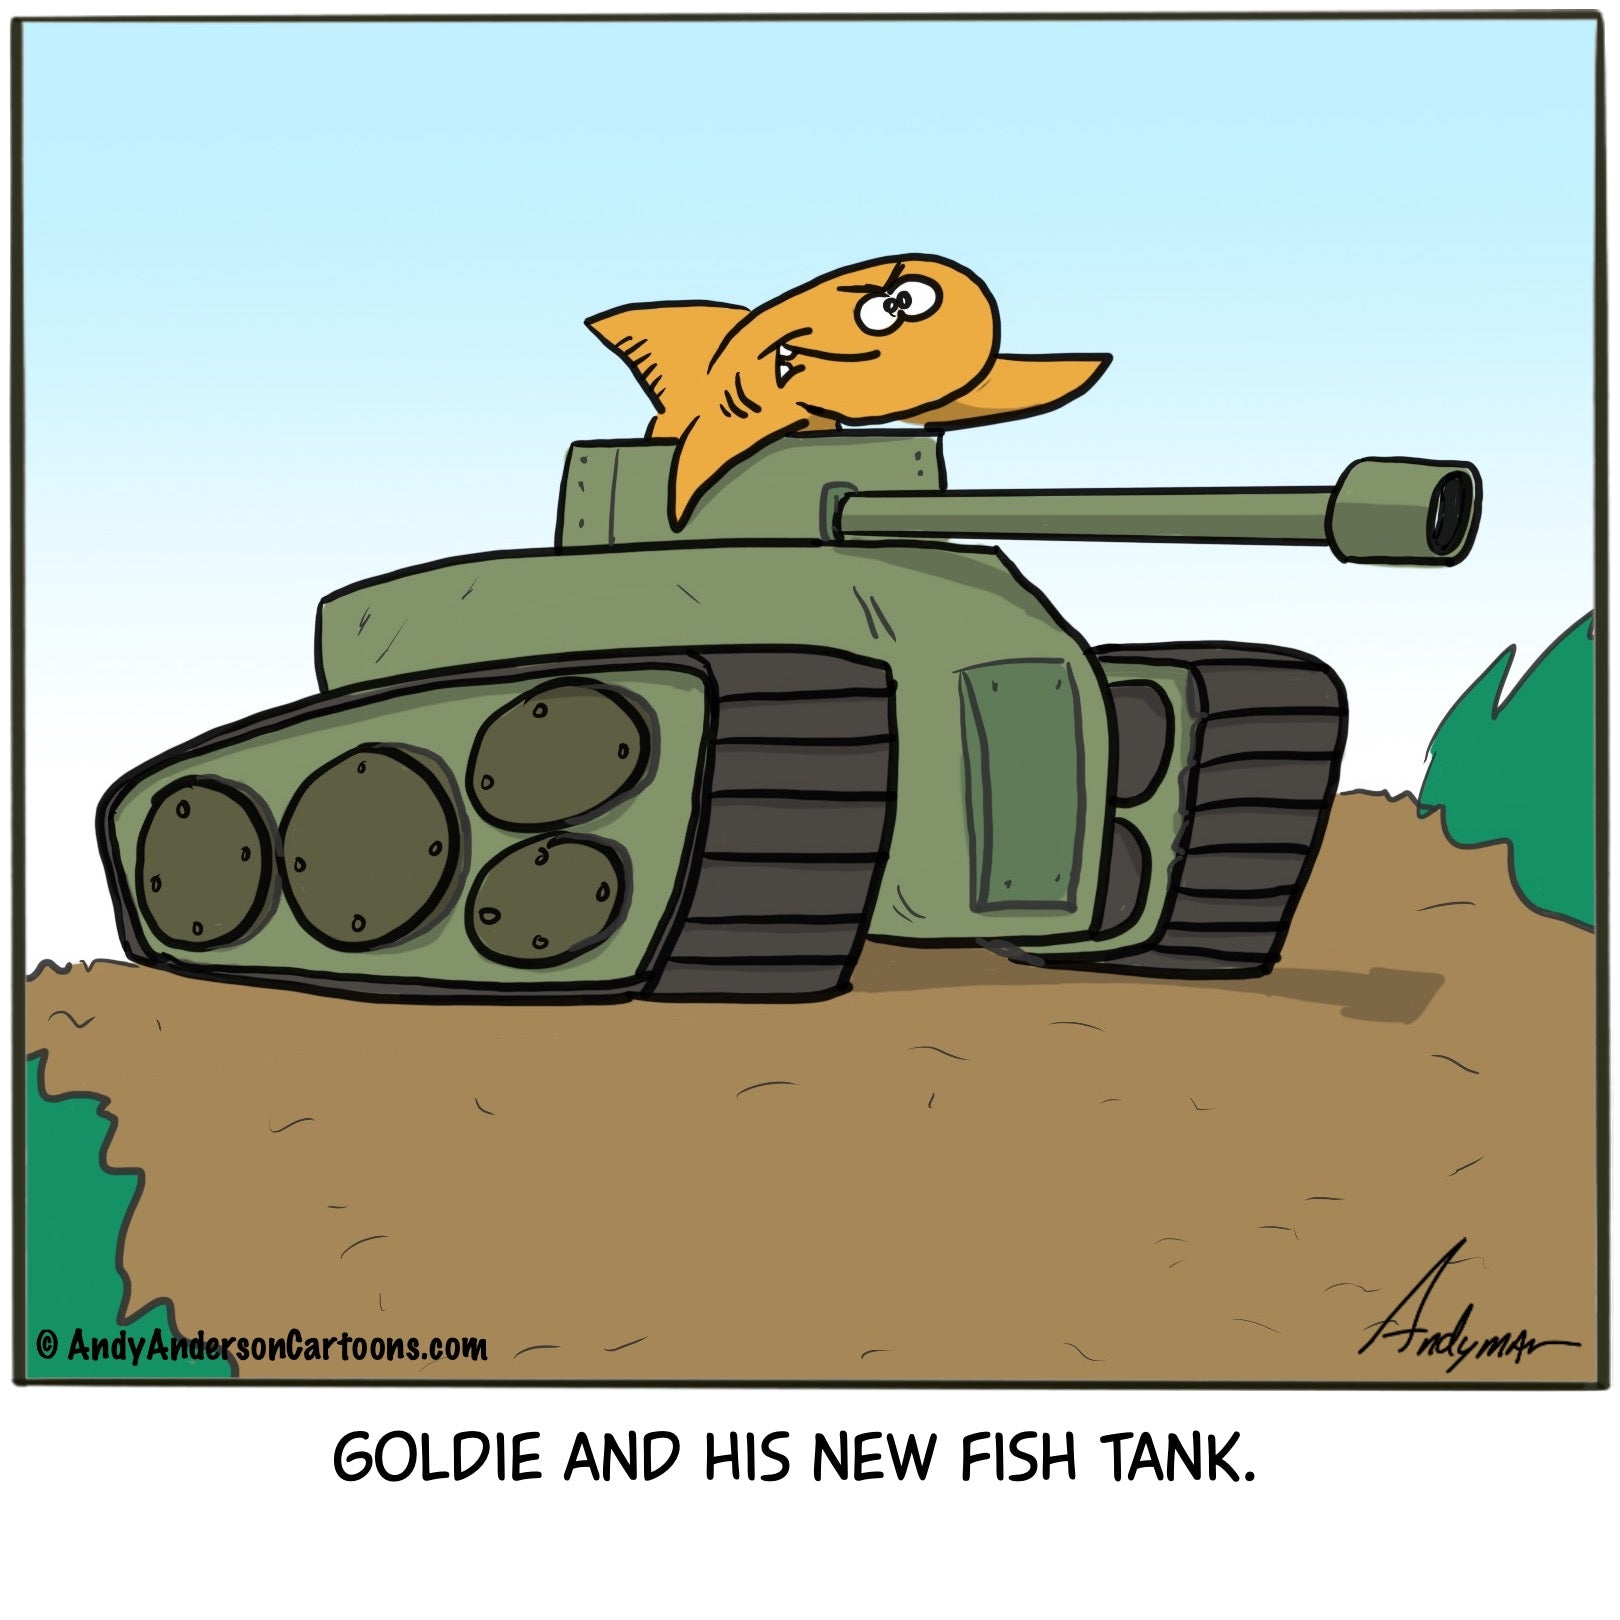 Cartoon/Meme about a fish tank – Andy Anderson Cartoons